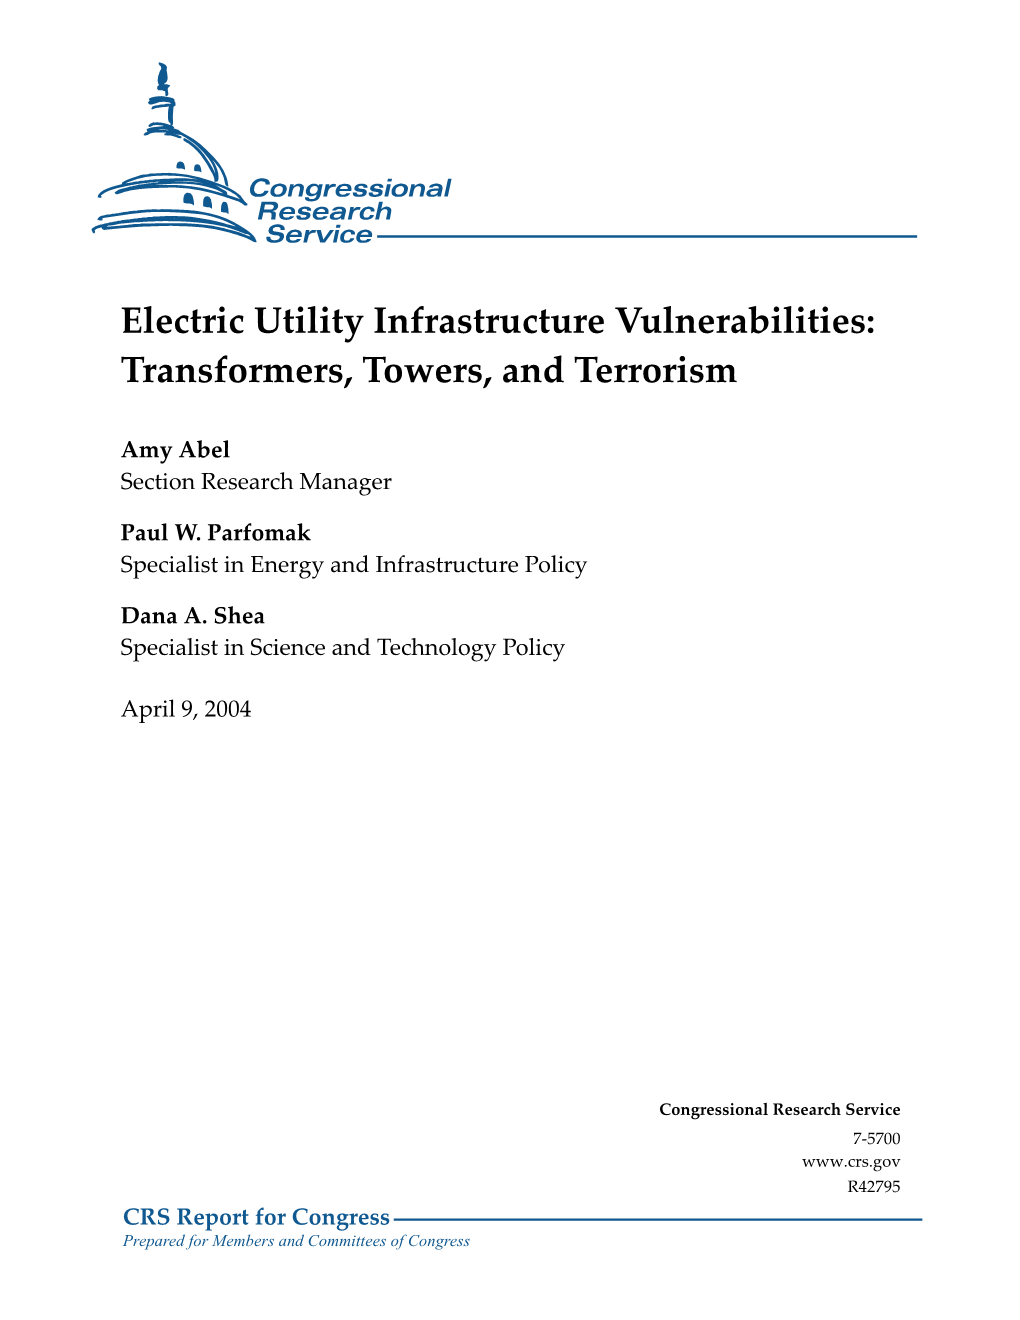 Electric Utility Infrastructure Vulnerabilities: Transformers, Towers, and Terrorism